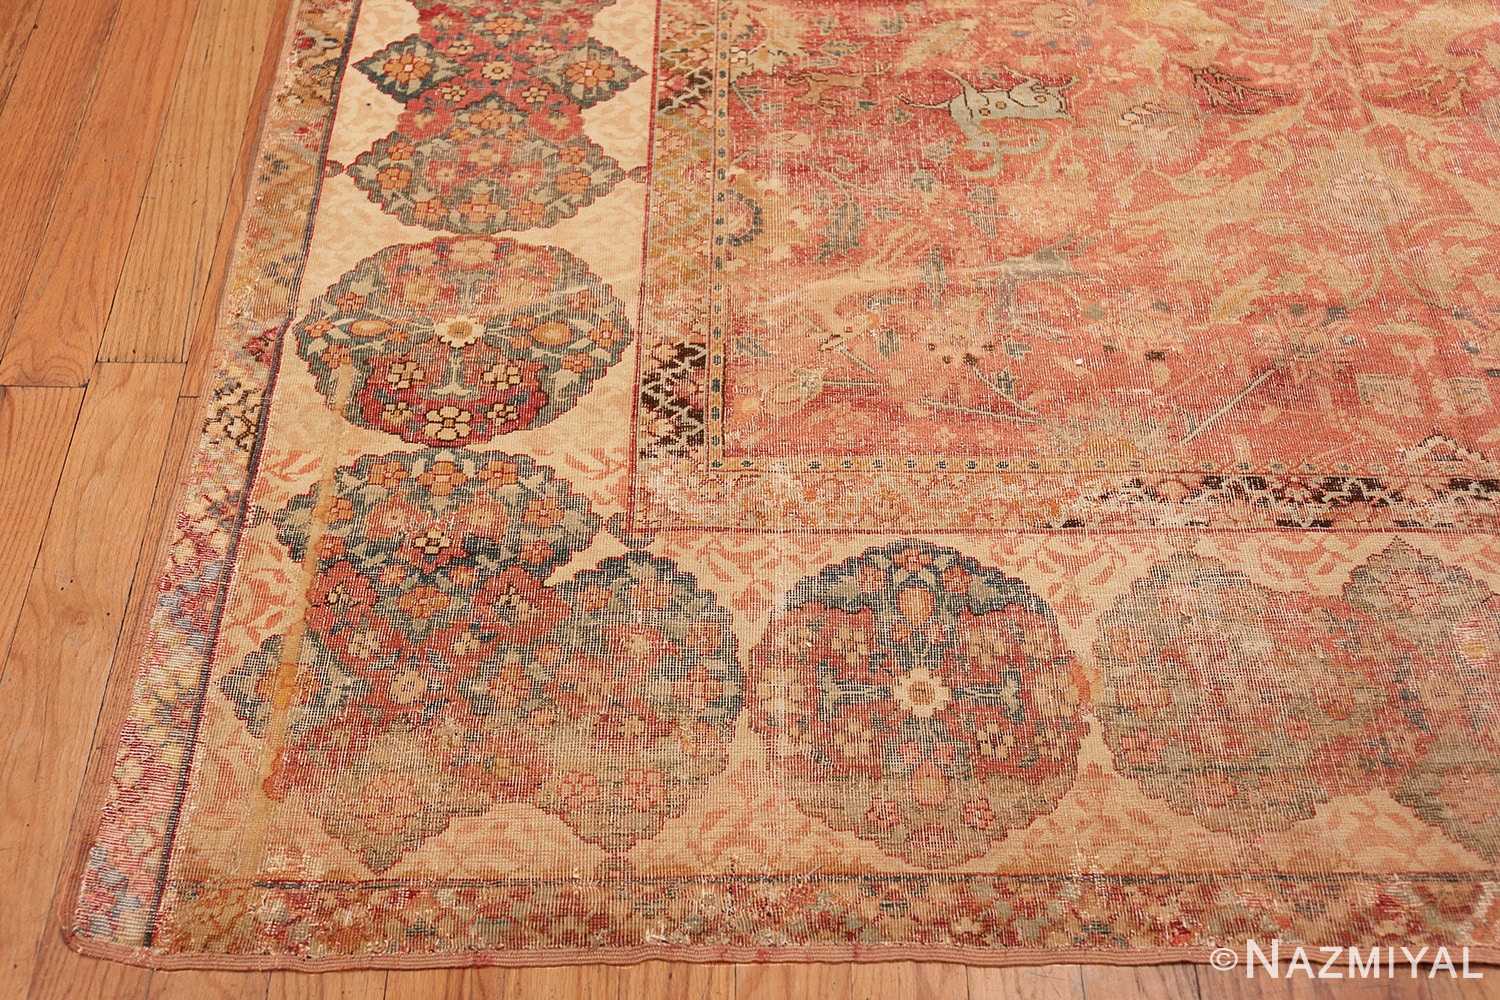 Corner Antique gallery size 17th Century Isfahan Persian rug 3338 by Nazmiyal